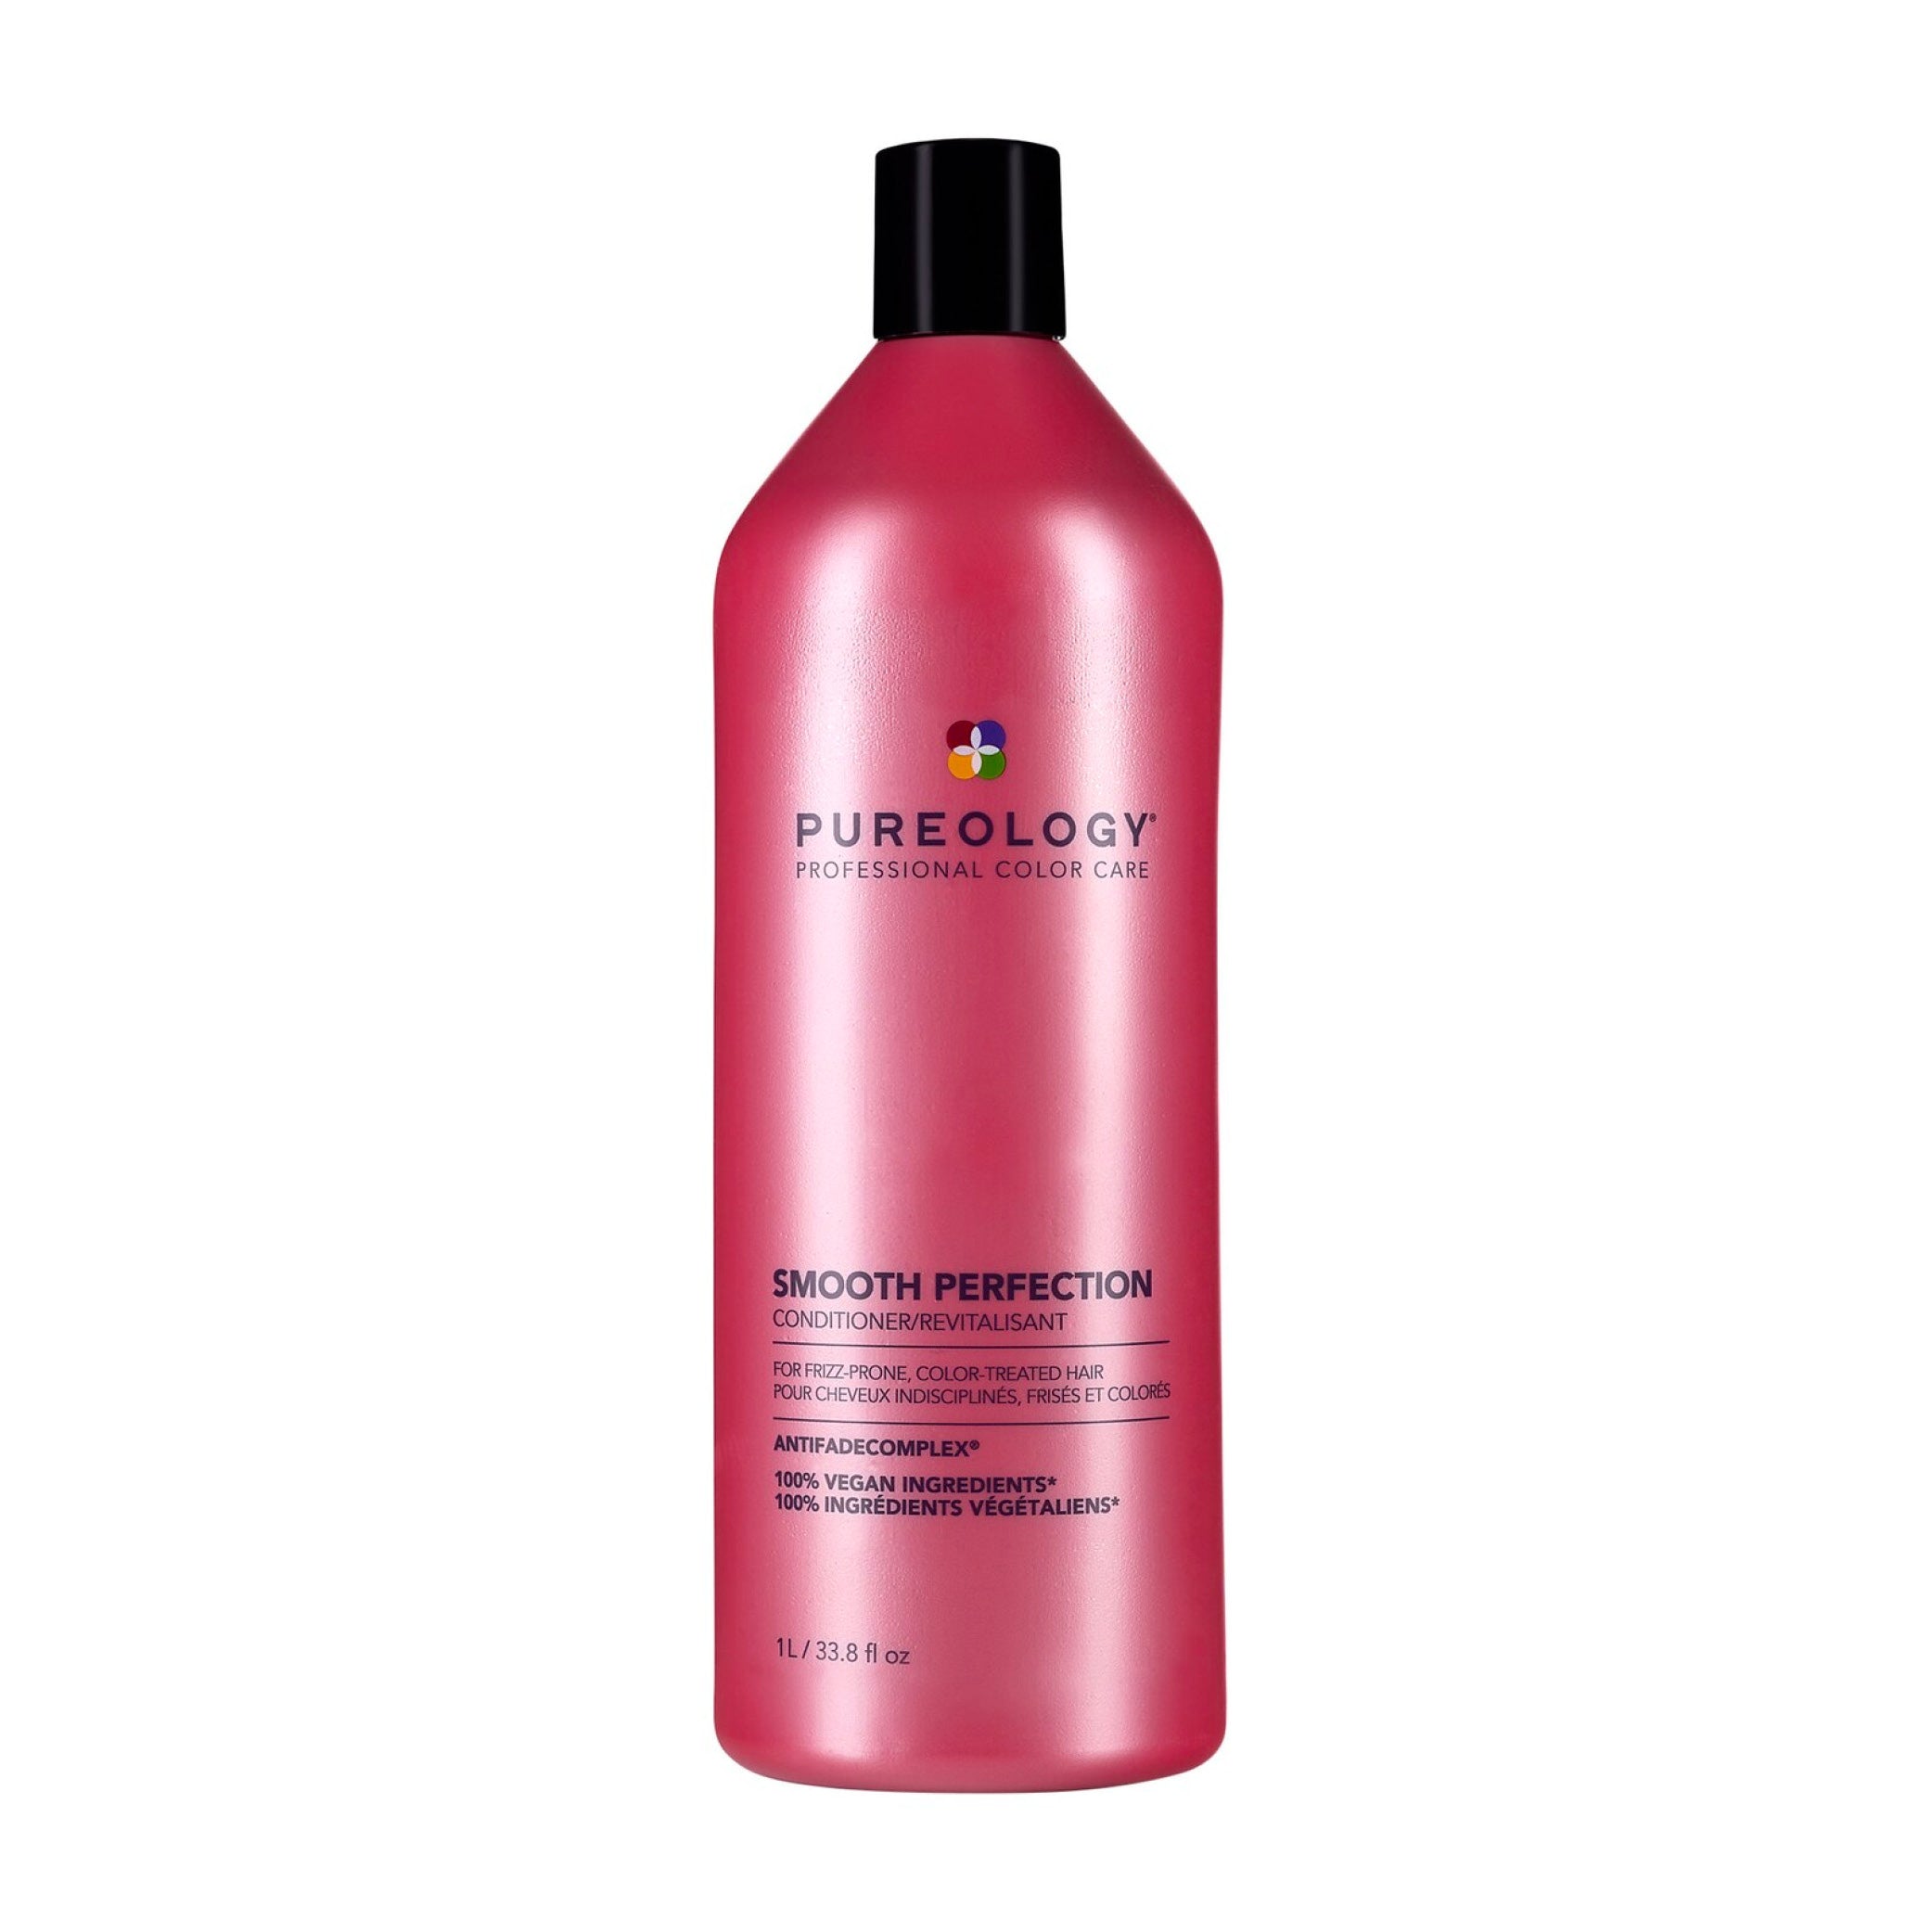 Smooth Perfection Conditioner